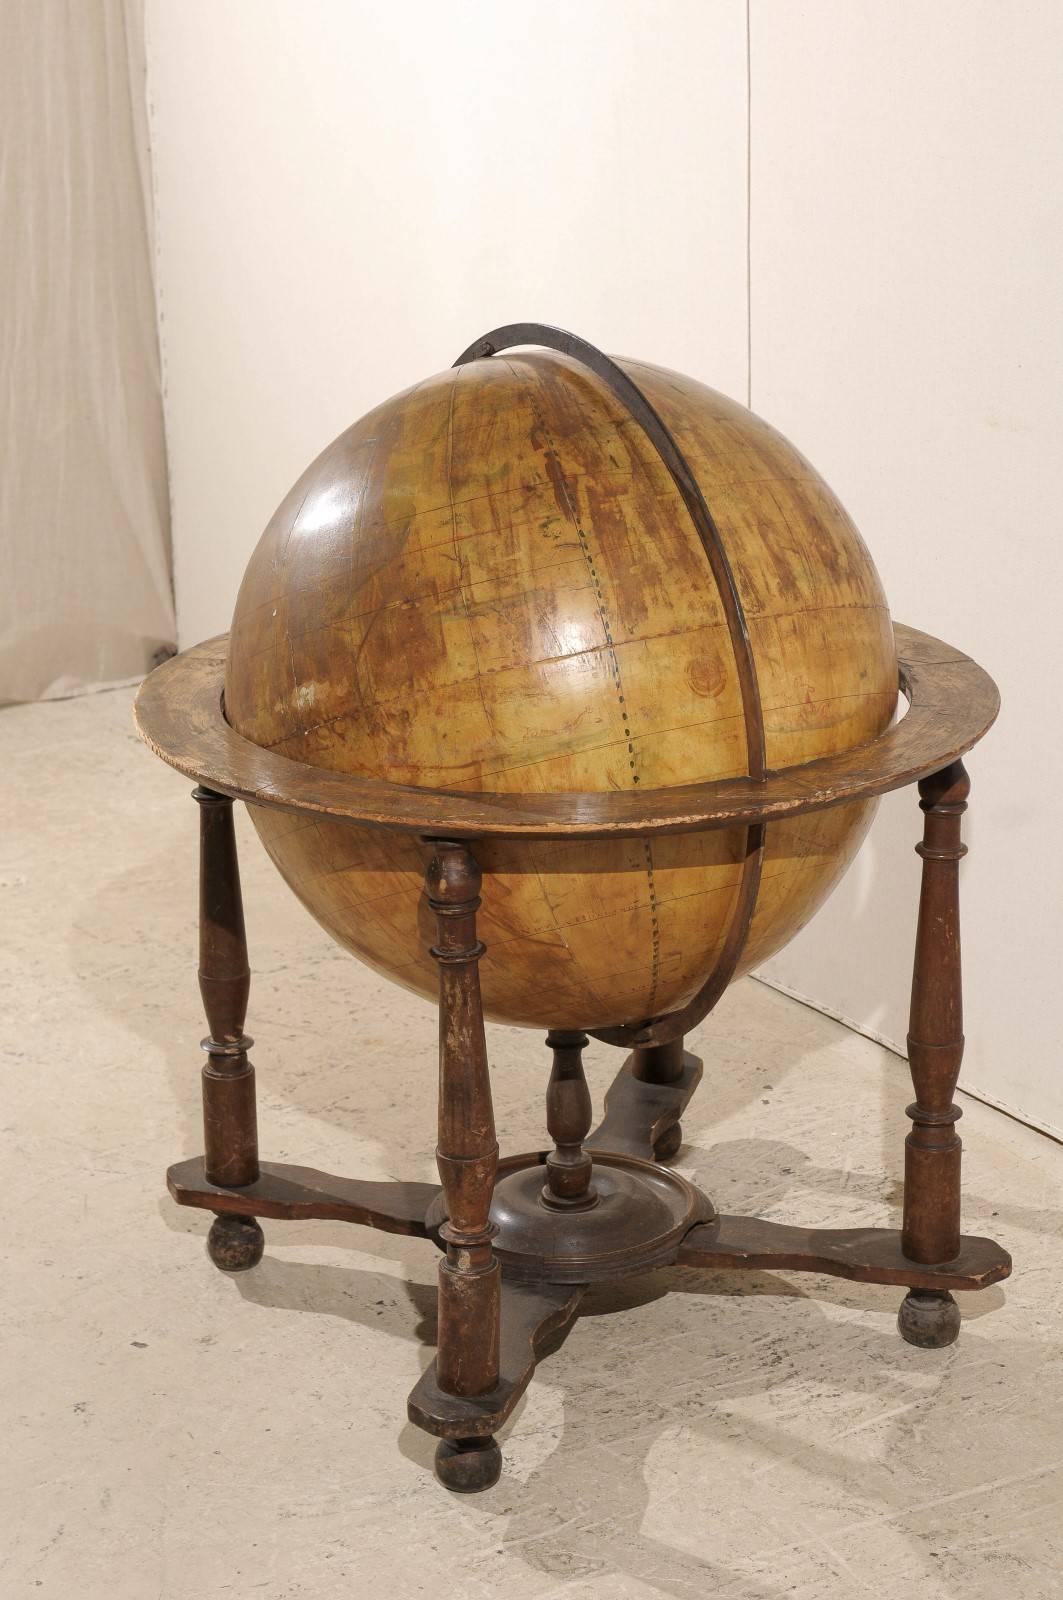 19th Century A Large-Sized Italian Heavily Foxed Velum Covered Globe on Wood Stand, 19th C.  For Sale